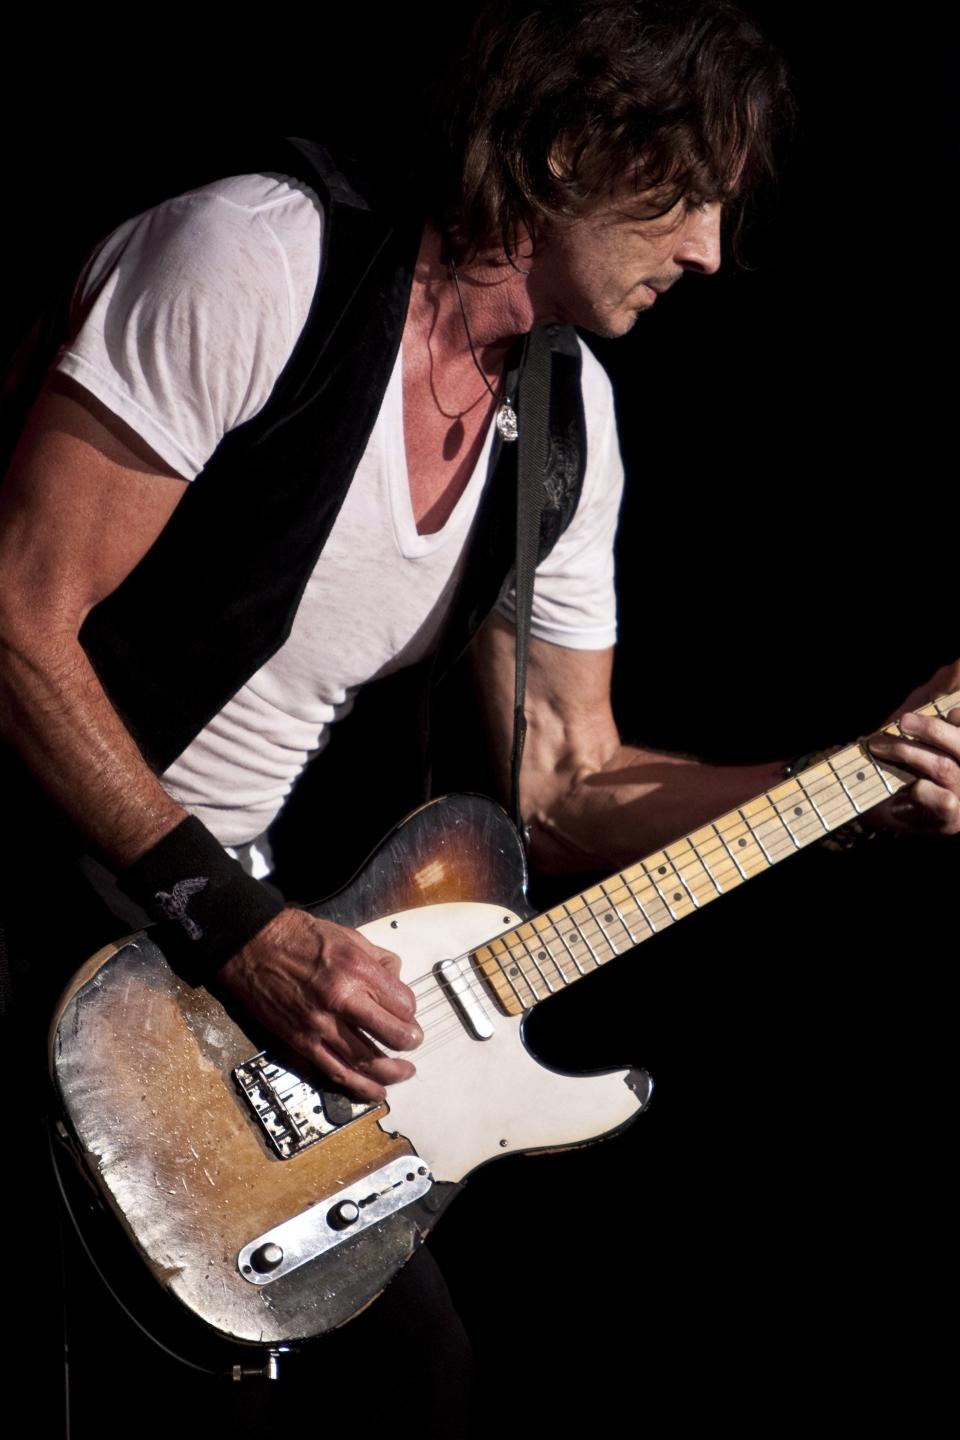 Rick Springfield will be one of the headliners at the Lancaster Festival this summer. He'll perform with the Lancaster Festival Orchestra on July 23.